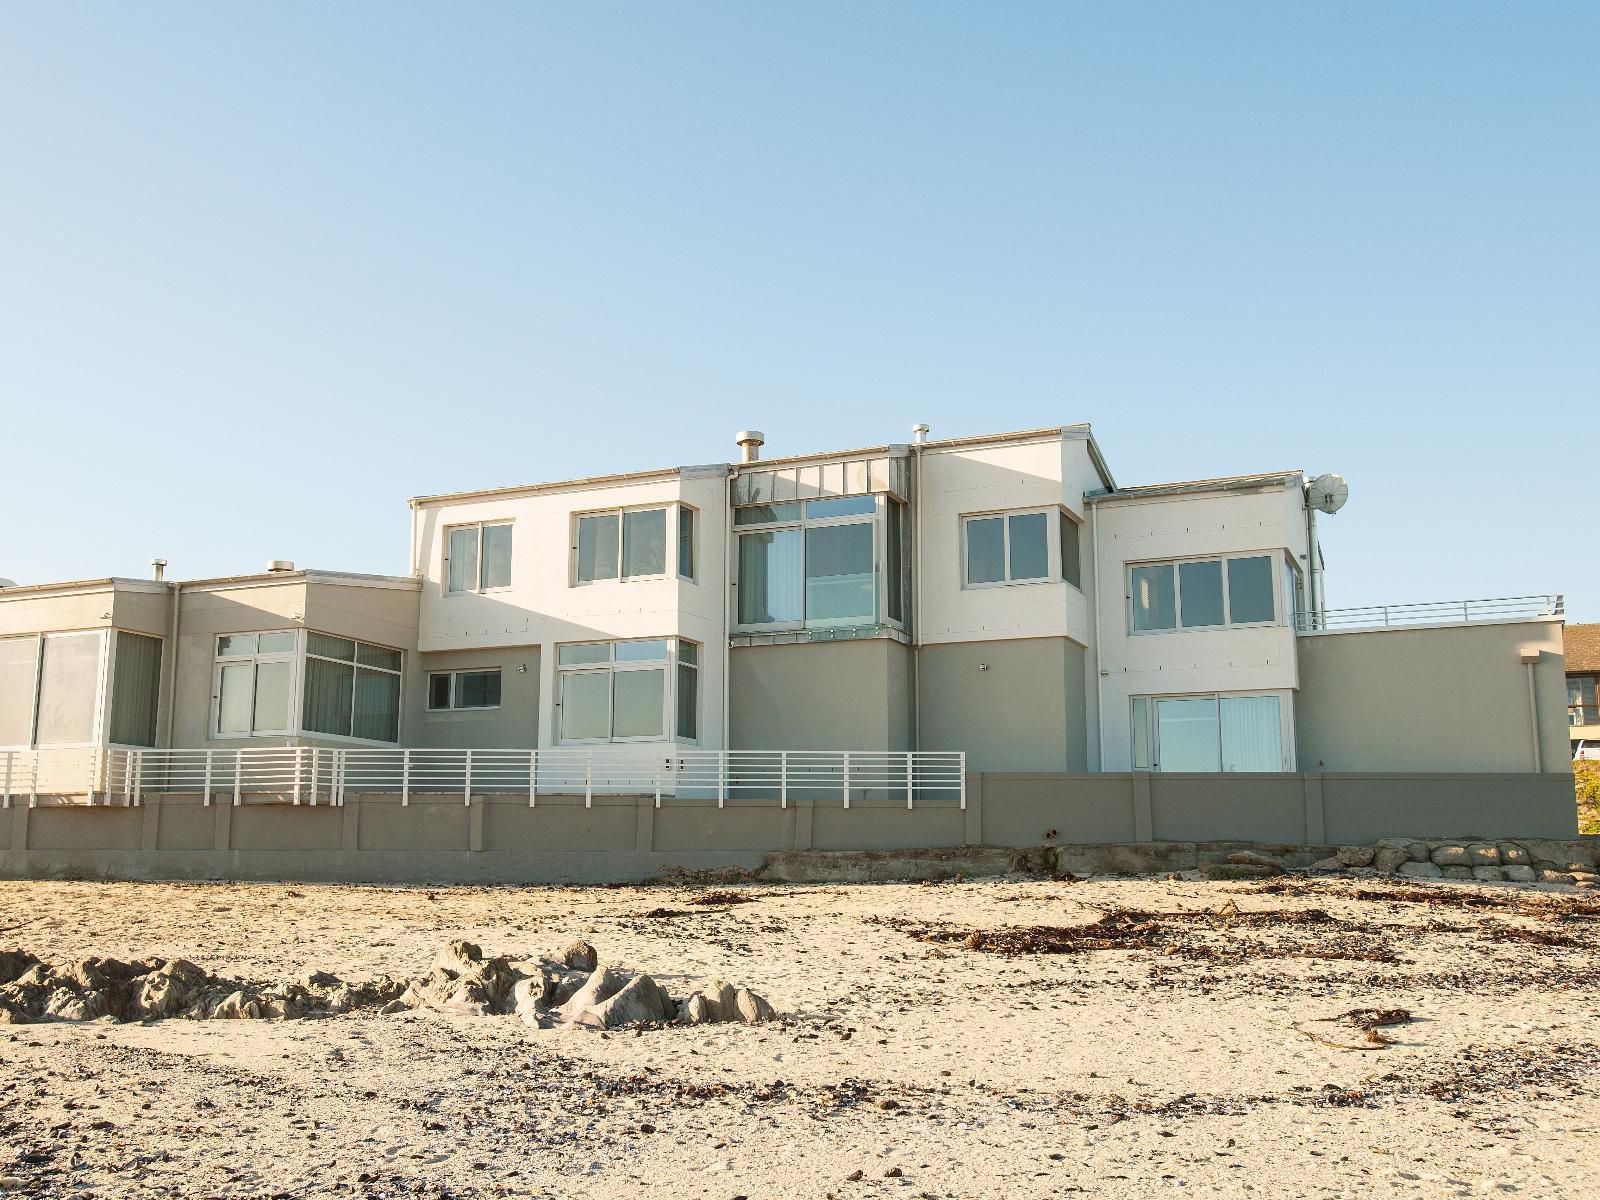 Bokkombaai Tides Bloubergstrand Blouberg Western Cape South Africa Complementary Colors, Building, Architecture, House, Desert, Nature, Sand